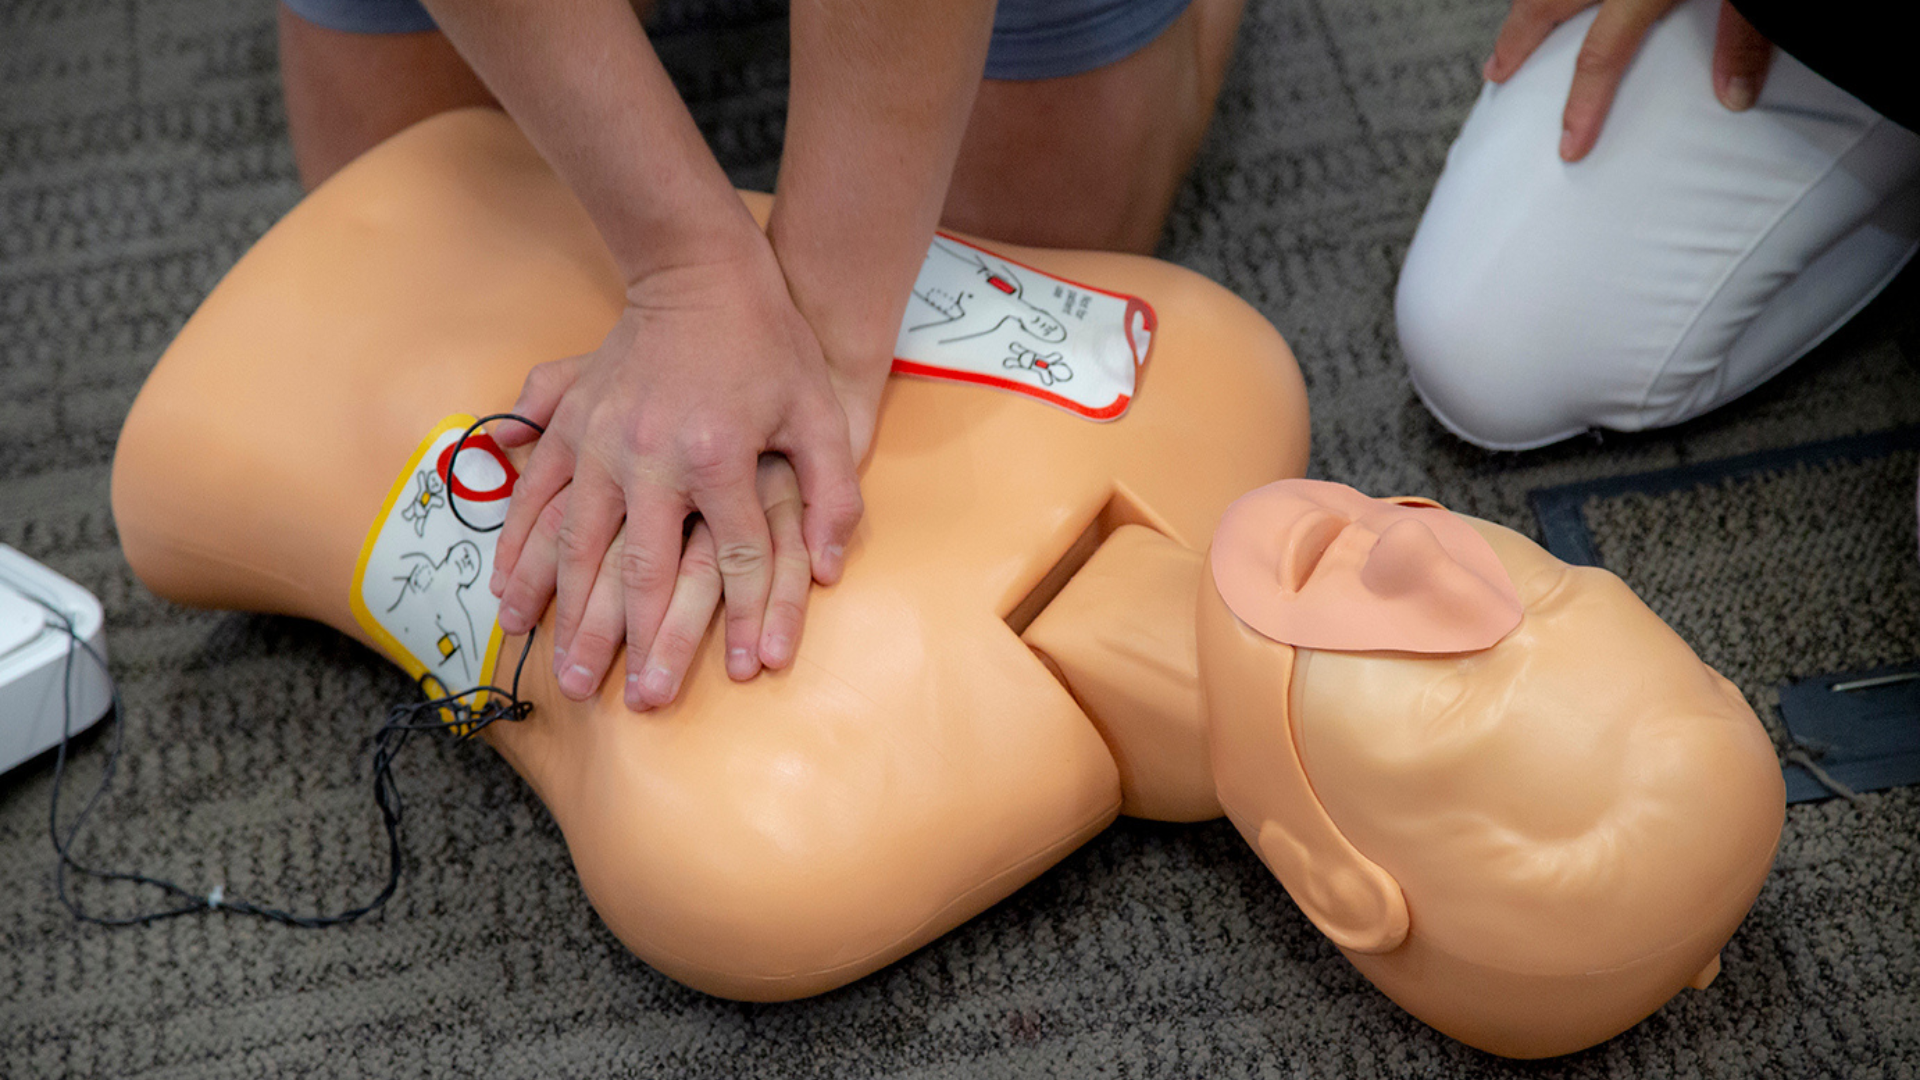 Photo of an AED being used on a manikin for training